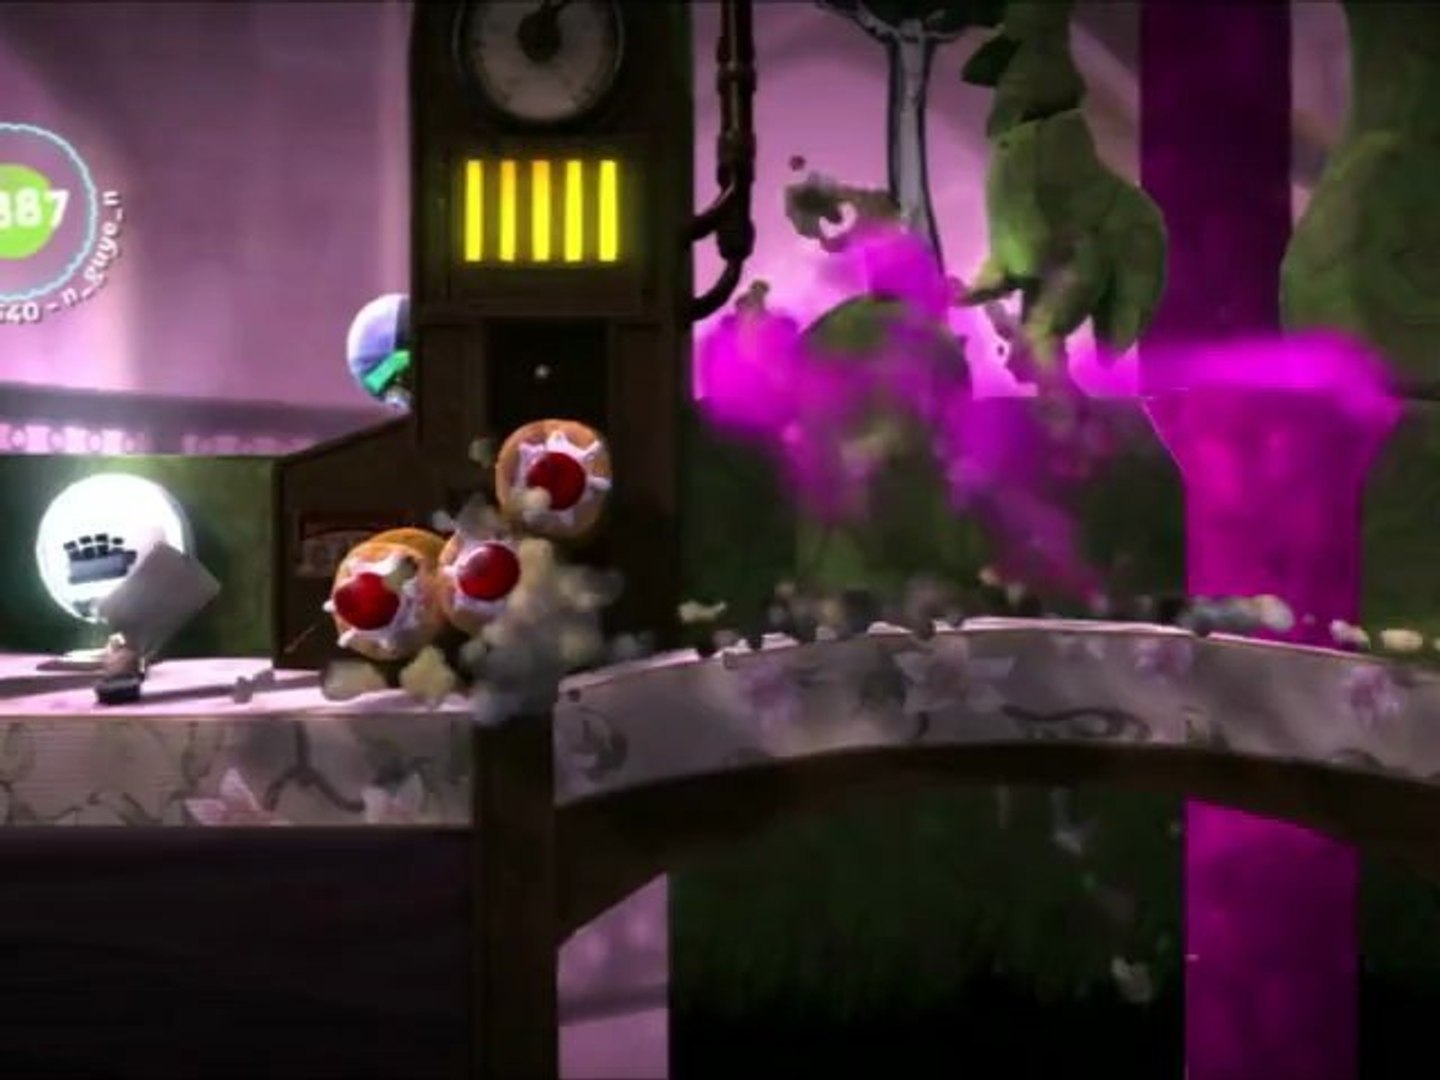 Classic Game Room - LITTLE BIG PLANET 2 for PS3 review